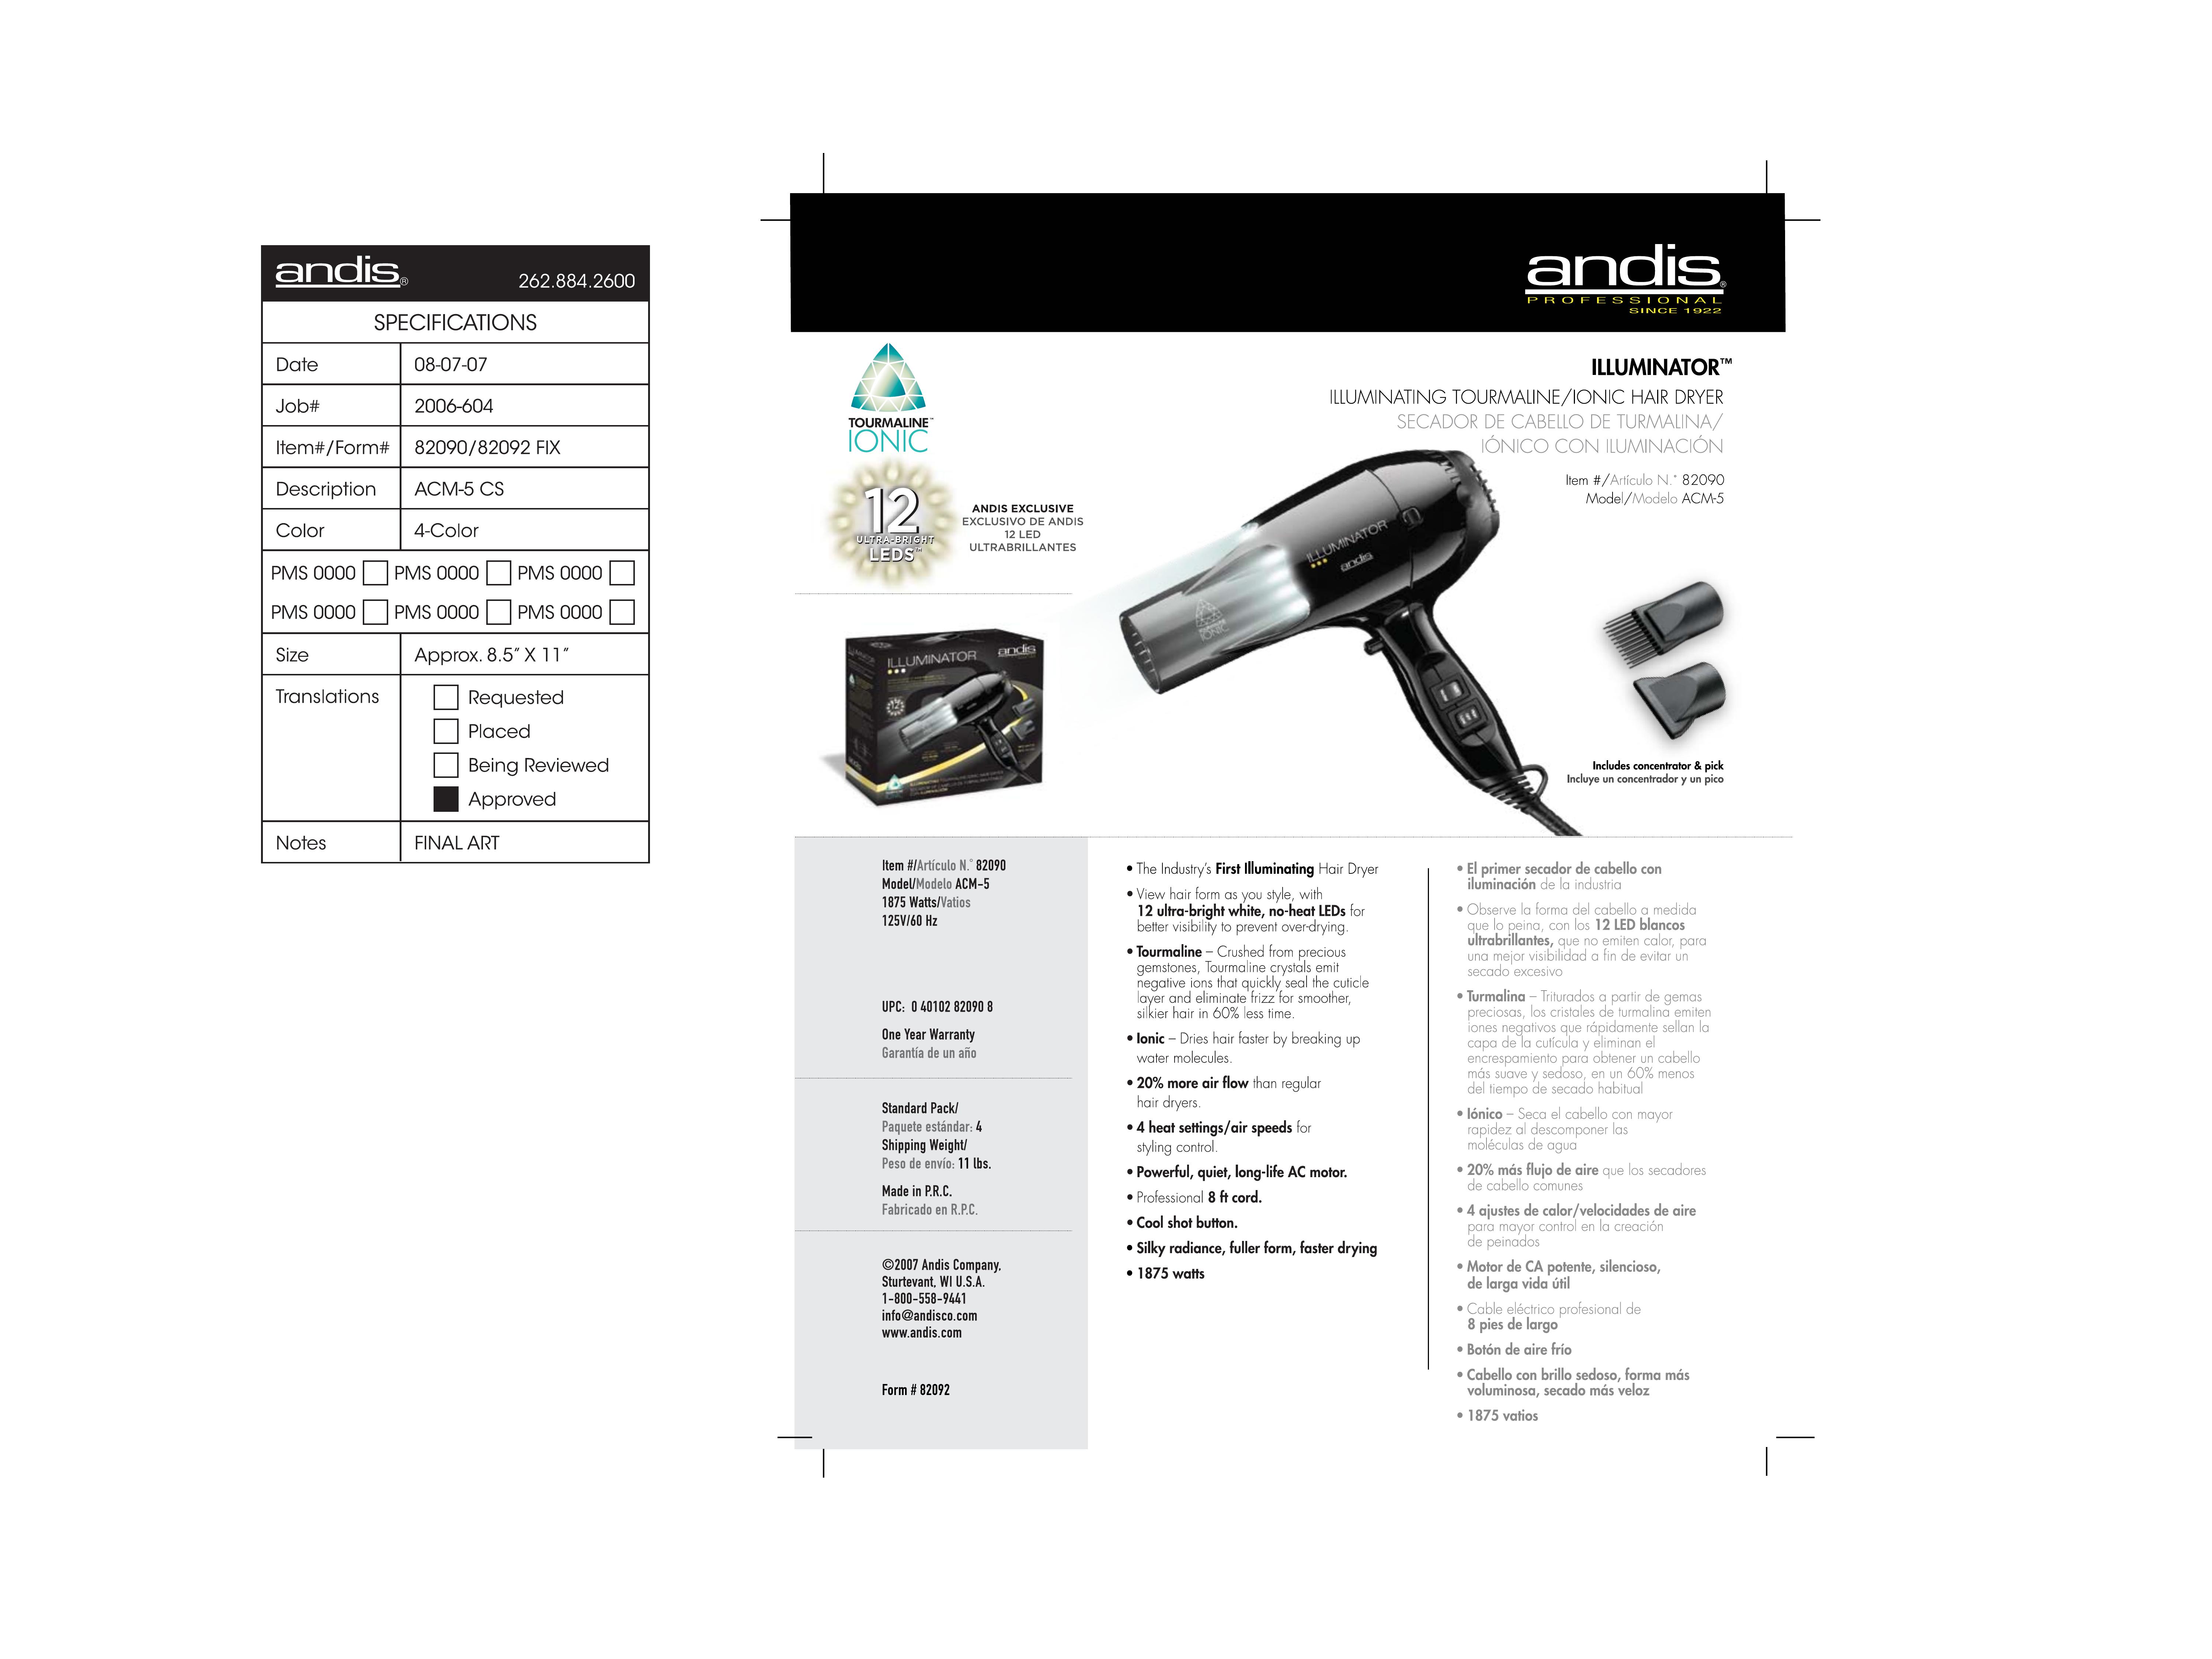 Andis Company ACM5 Hair Dryer User Manual